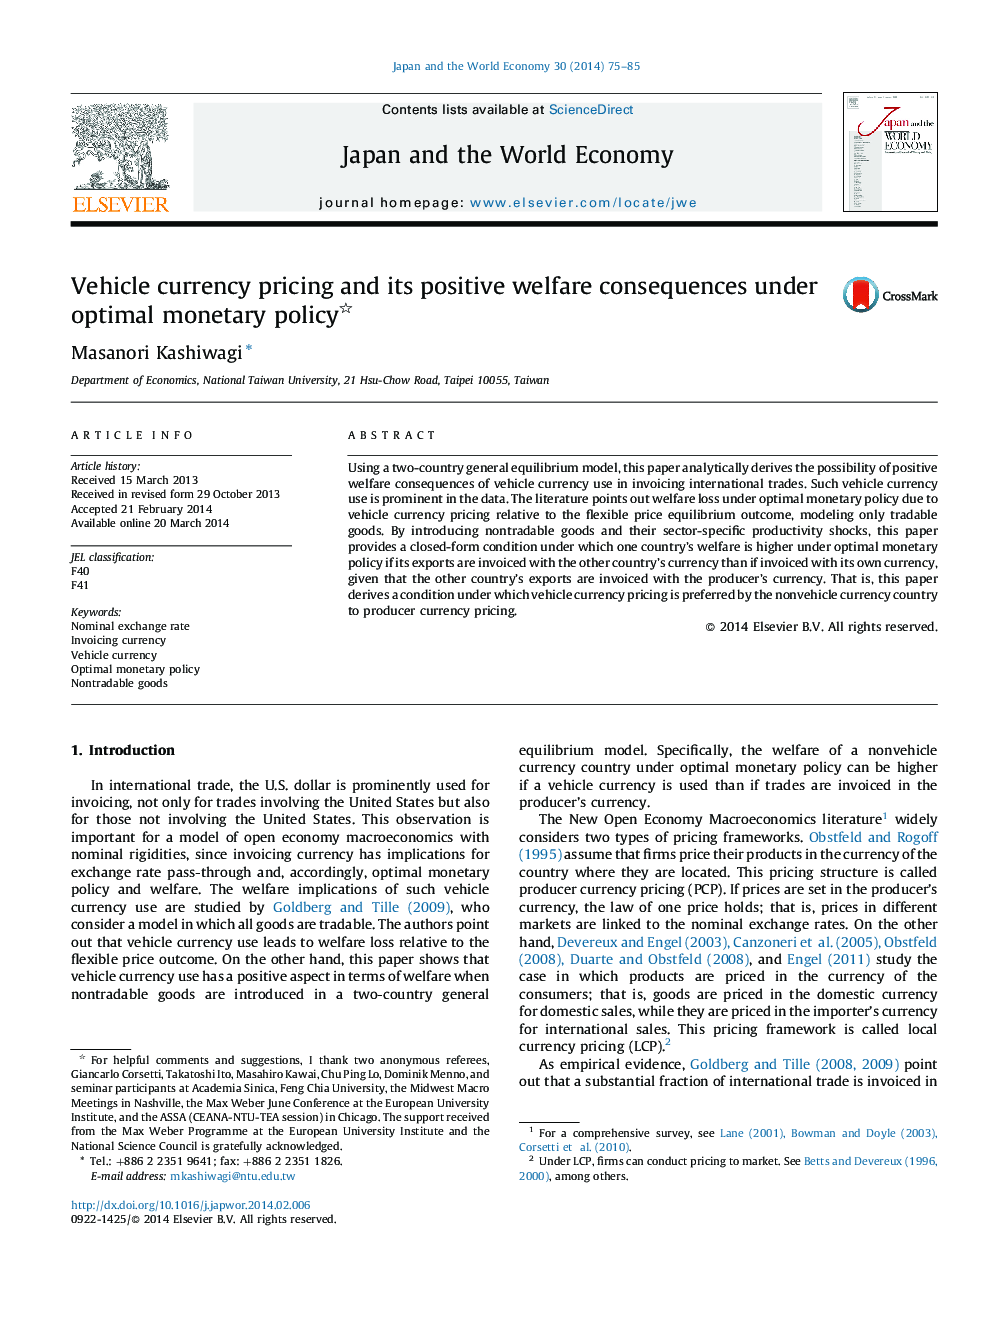 Vehicle currency pricing and its positive welfare consequences under optimal monetary policy